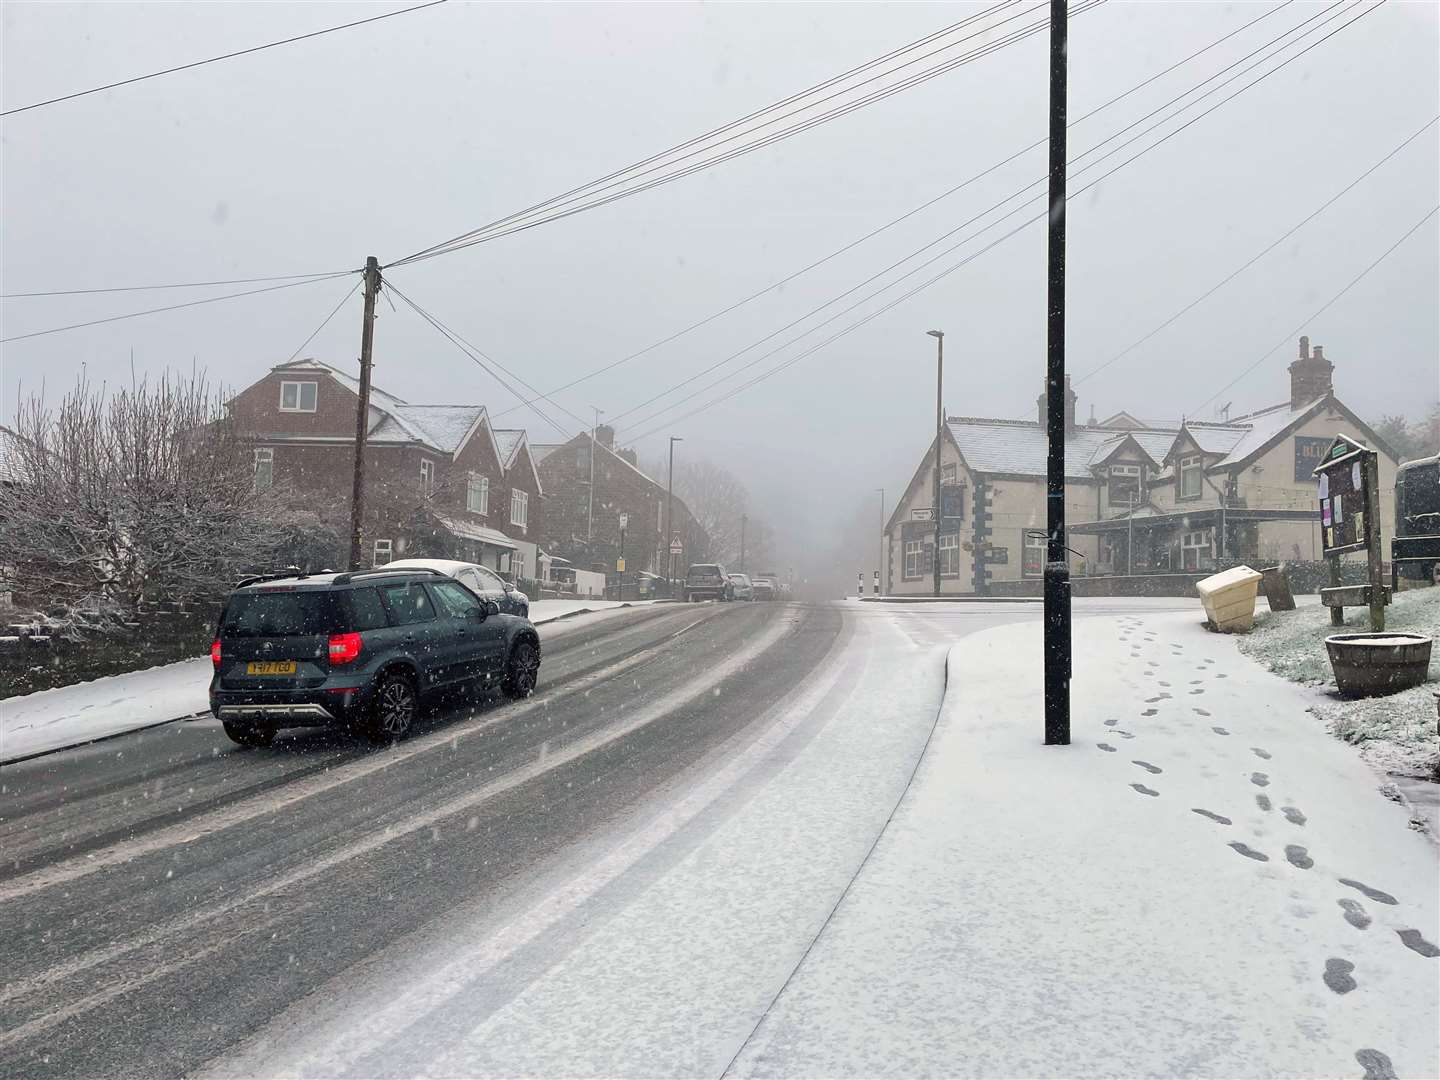 Snow in Worrall in South Yorkshire as up to 25cm of snow was forecast in parts of England and Wales (Dave Higgens/PA)